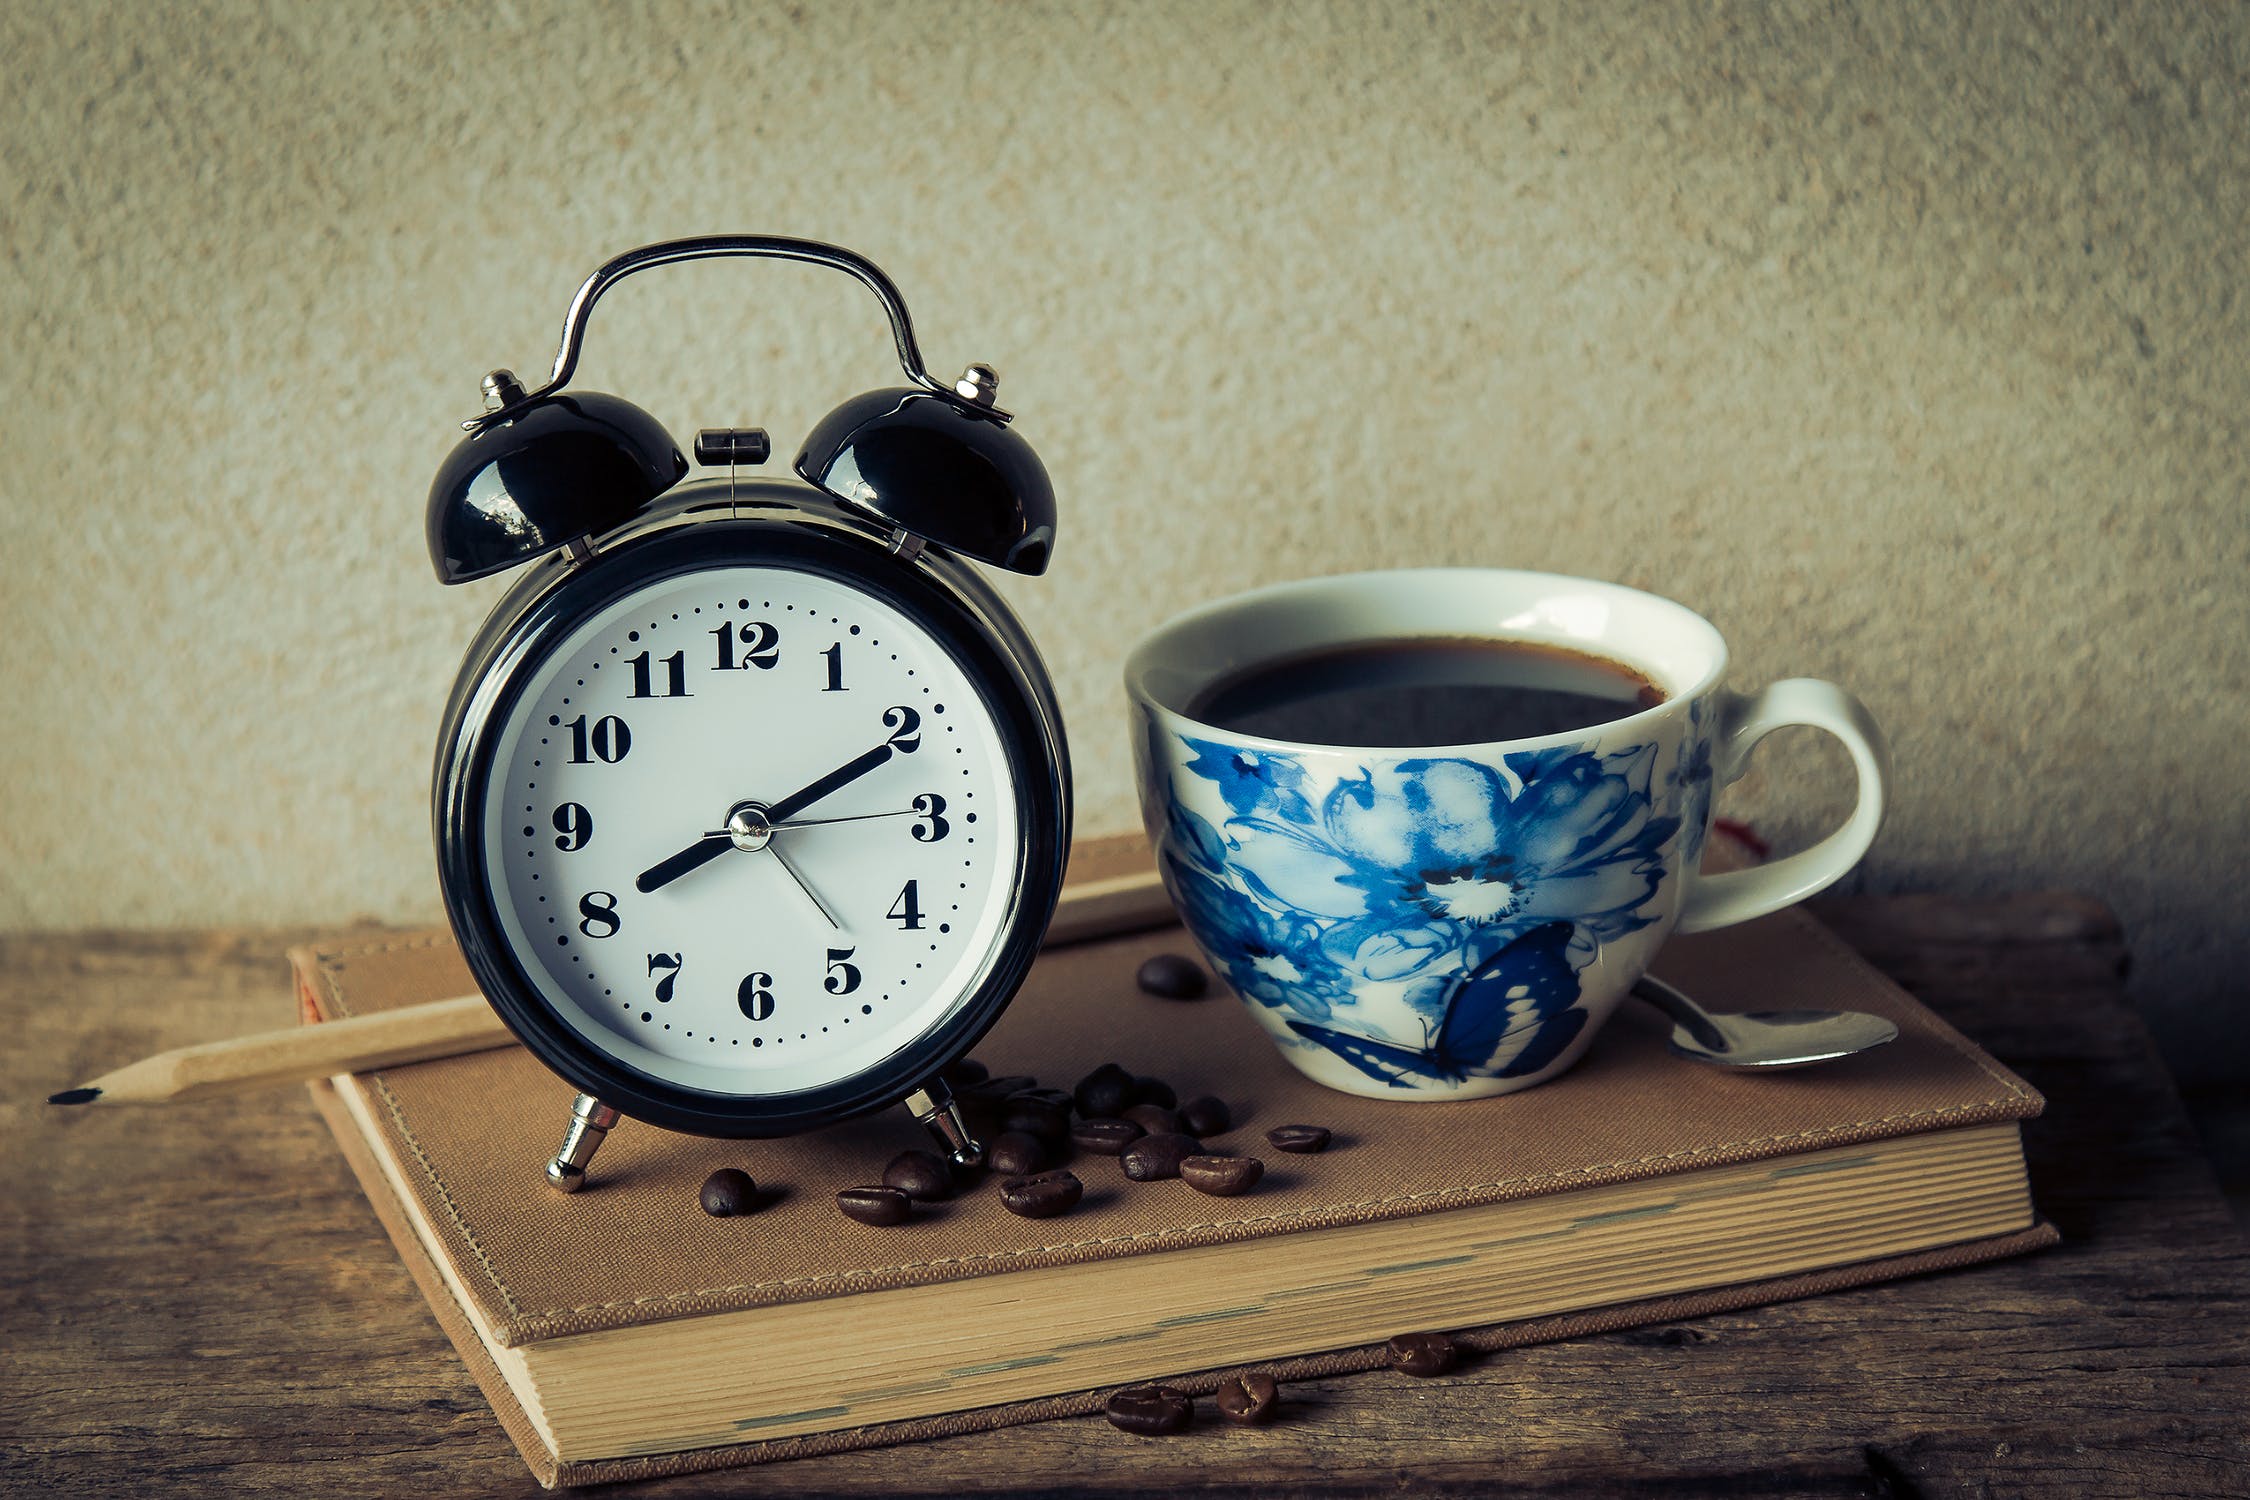 A photo of an alarm clock and a cup of coffee